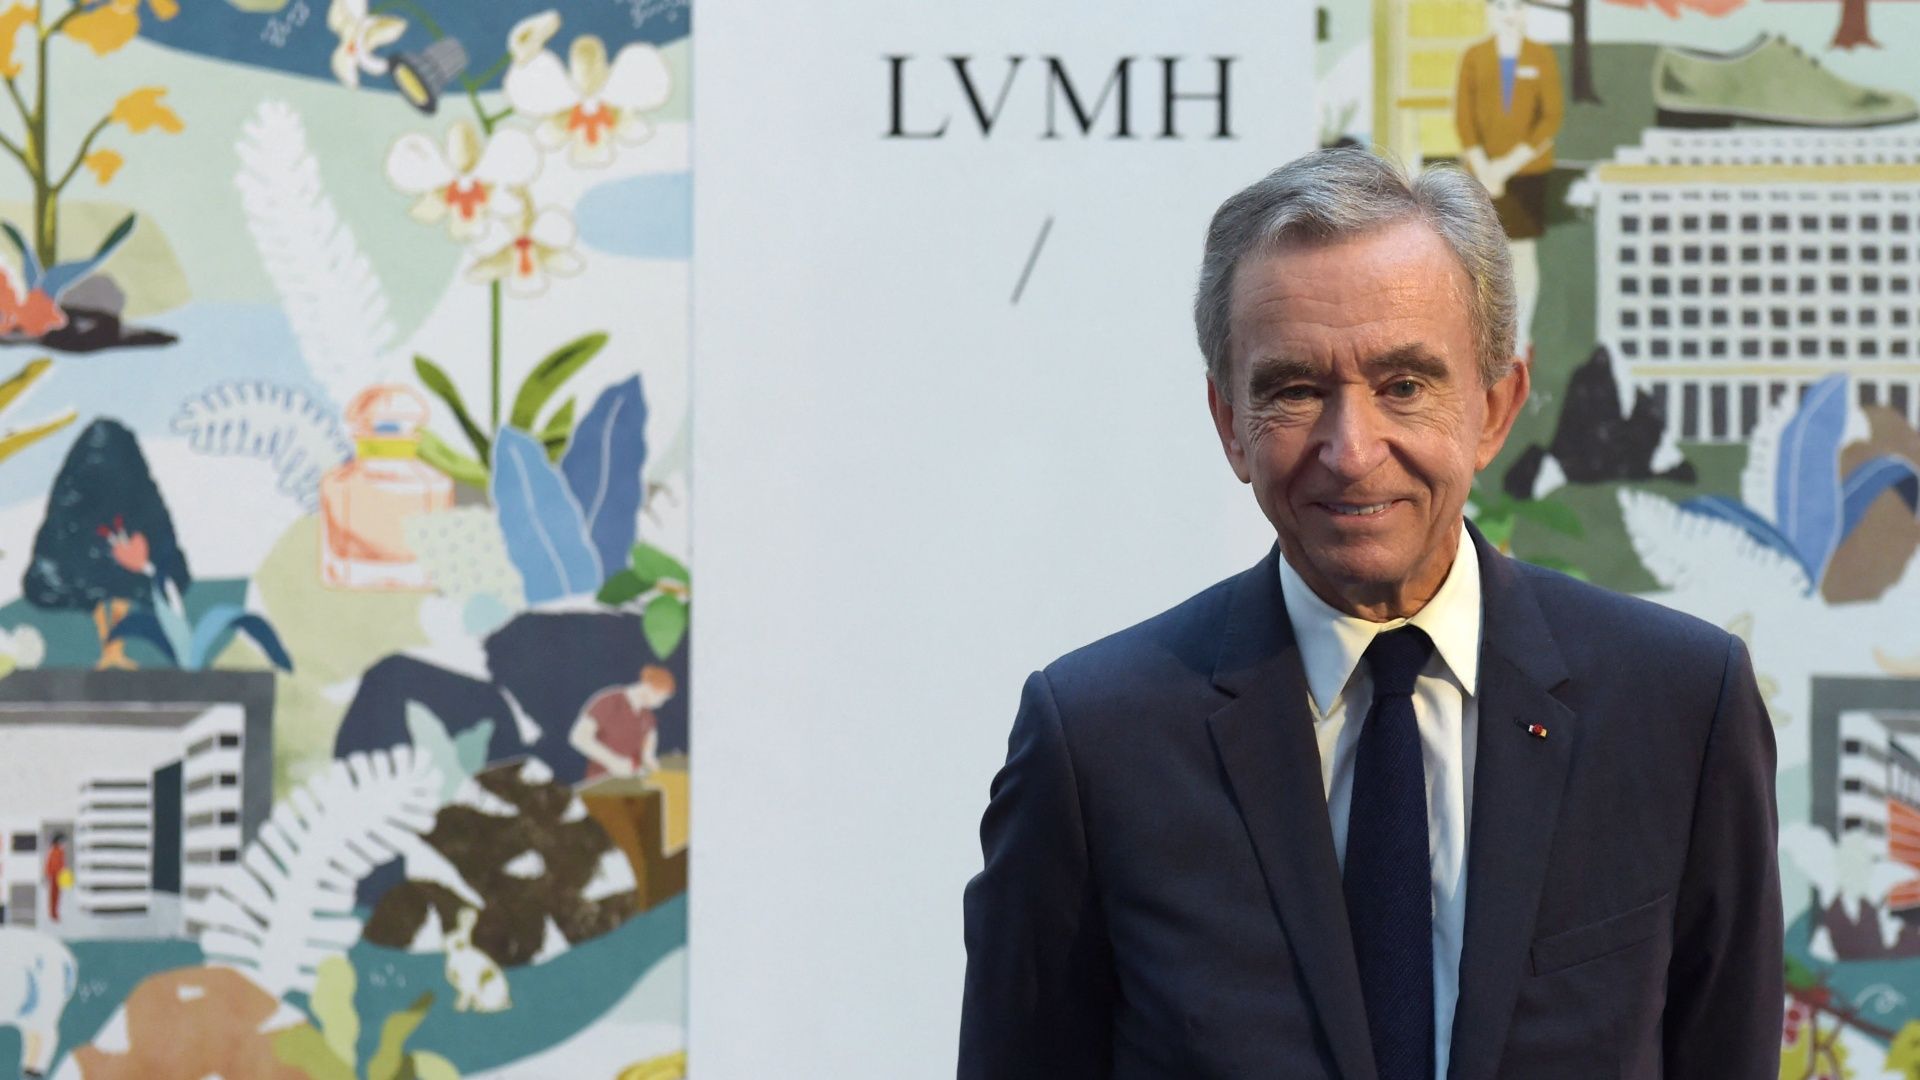 LVMH CEO Drops to Number Three On Richest Person List